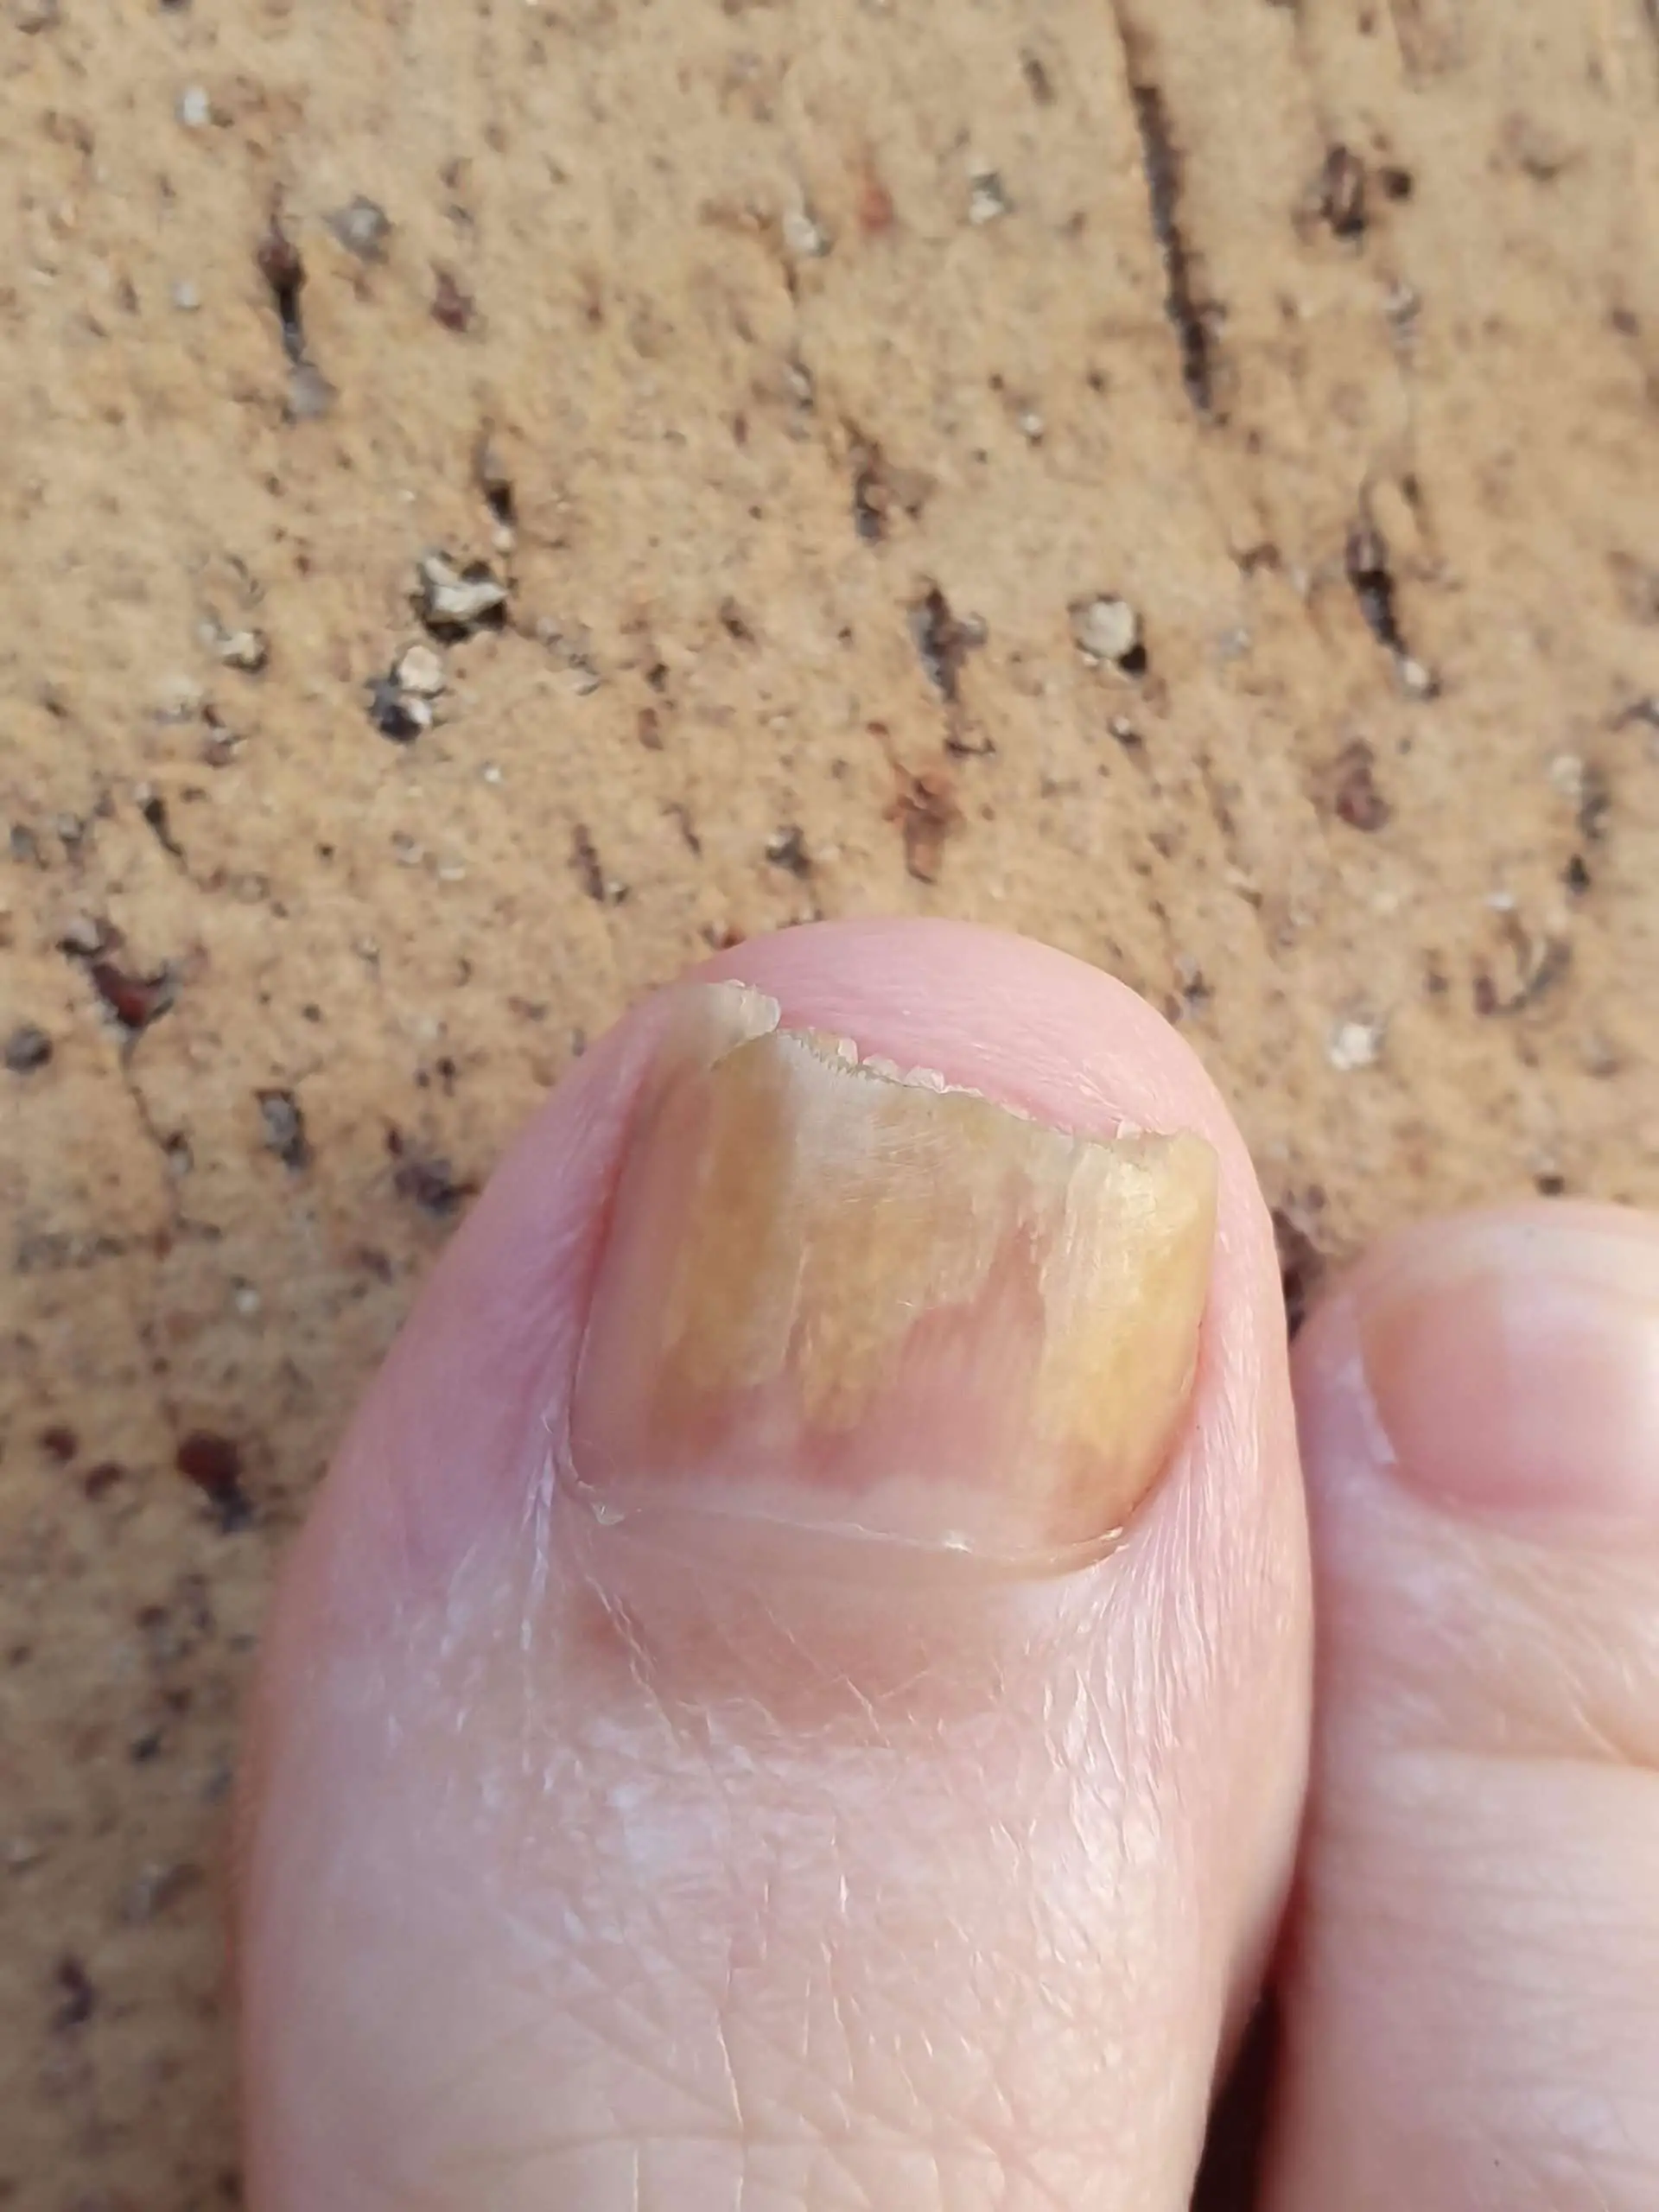 Does this look like nail fungus? I remember kicking the ...